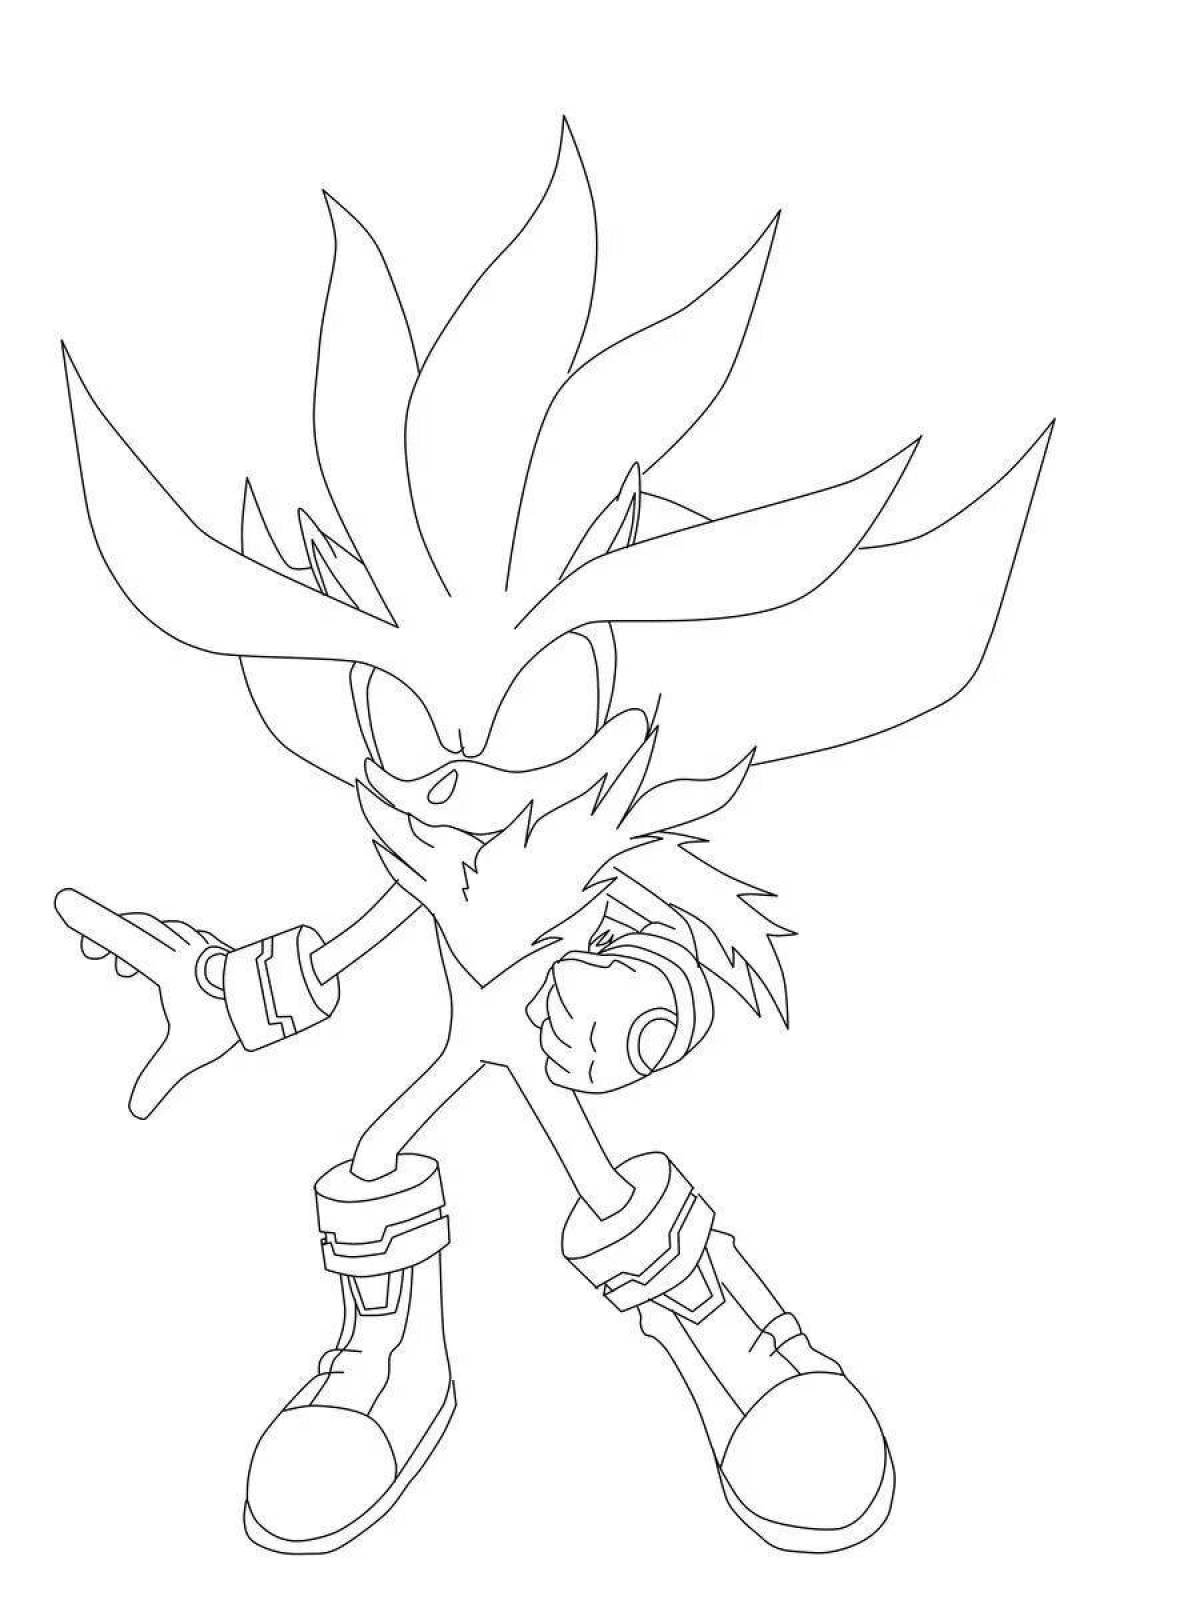 Greatly crafted darkspine sonic coloring page